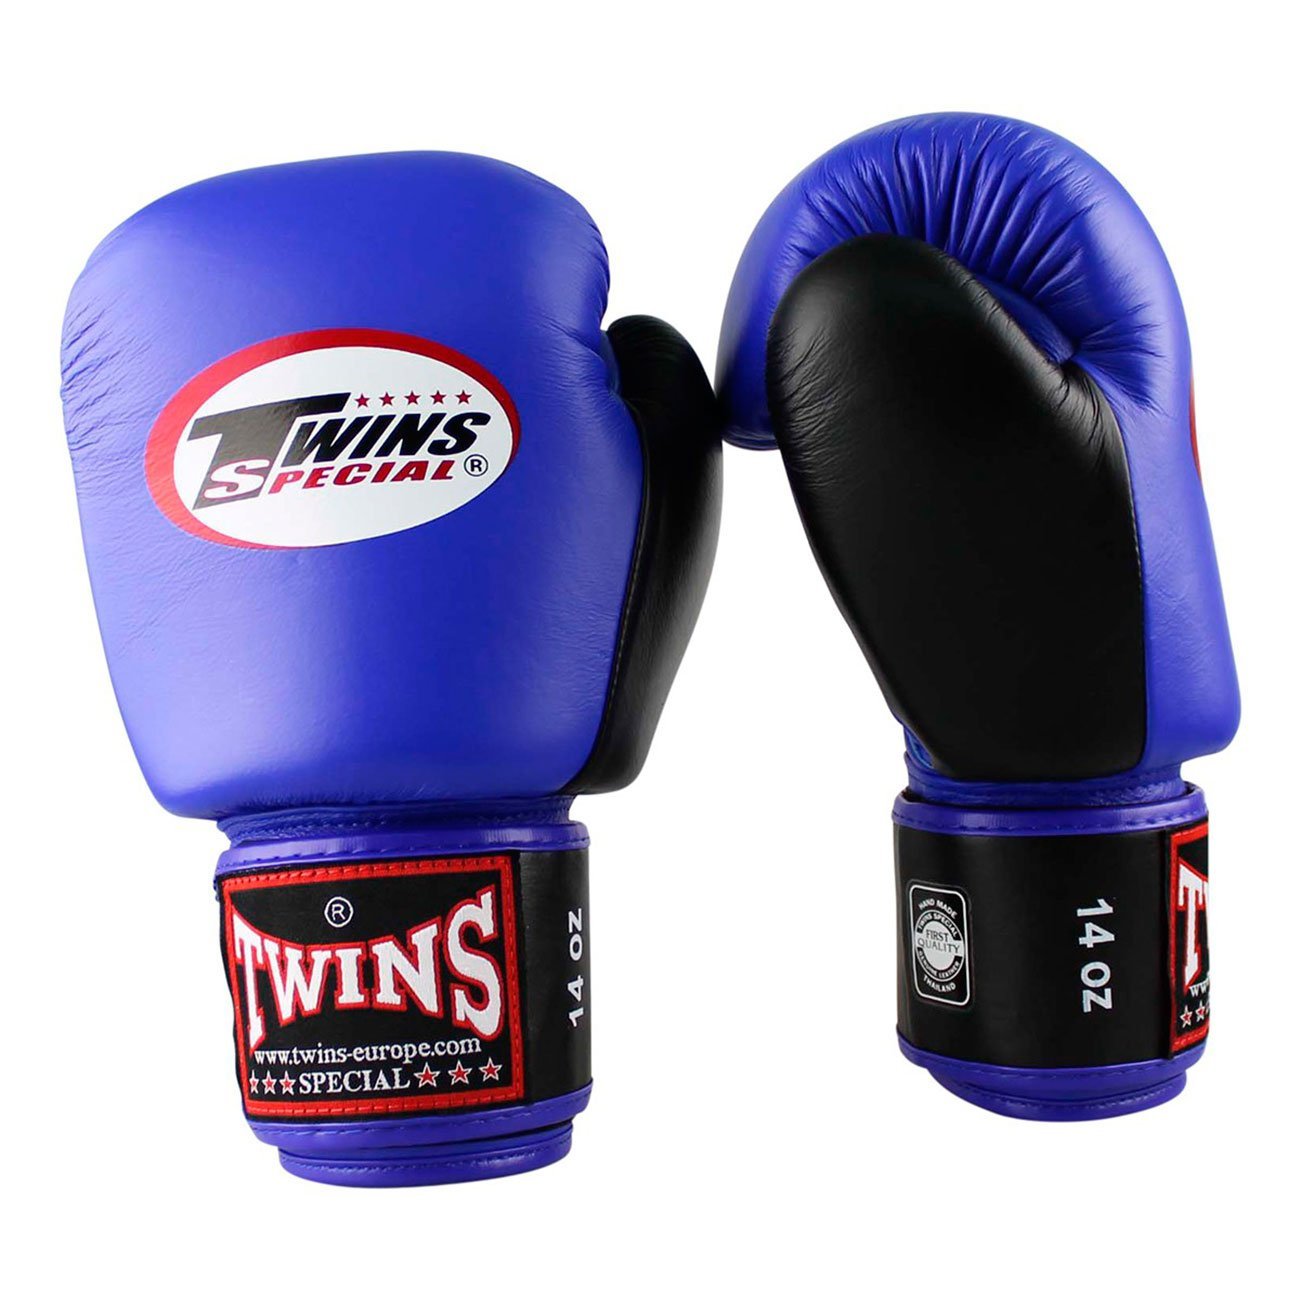 Twins Special Boxing Gloves BGVL3-T Bk/Bu Blue Front